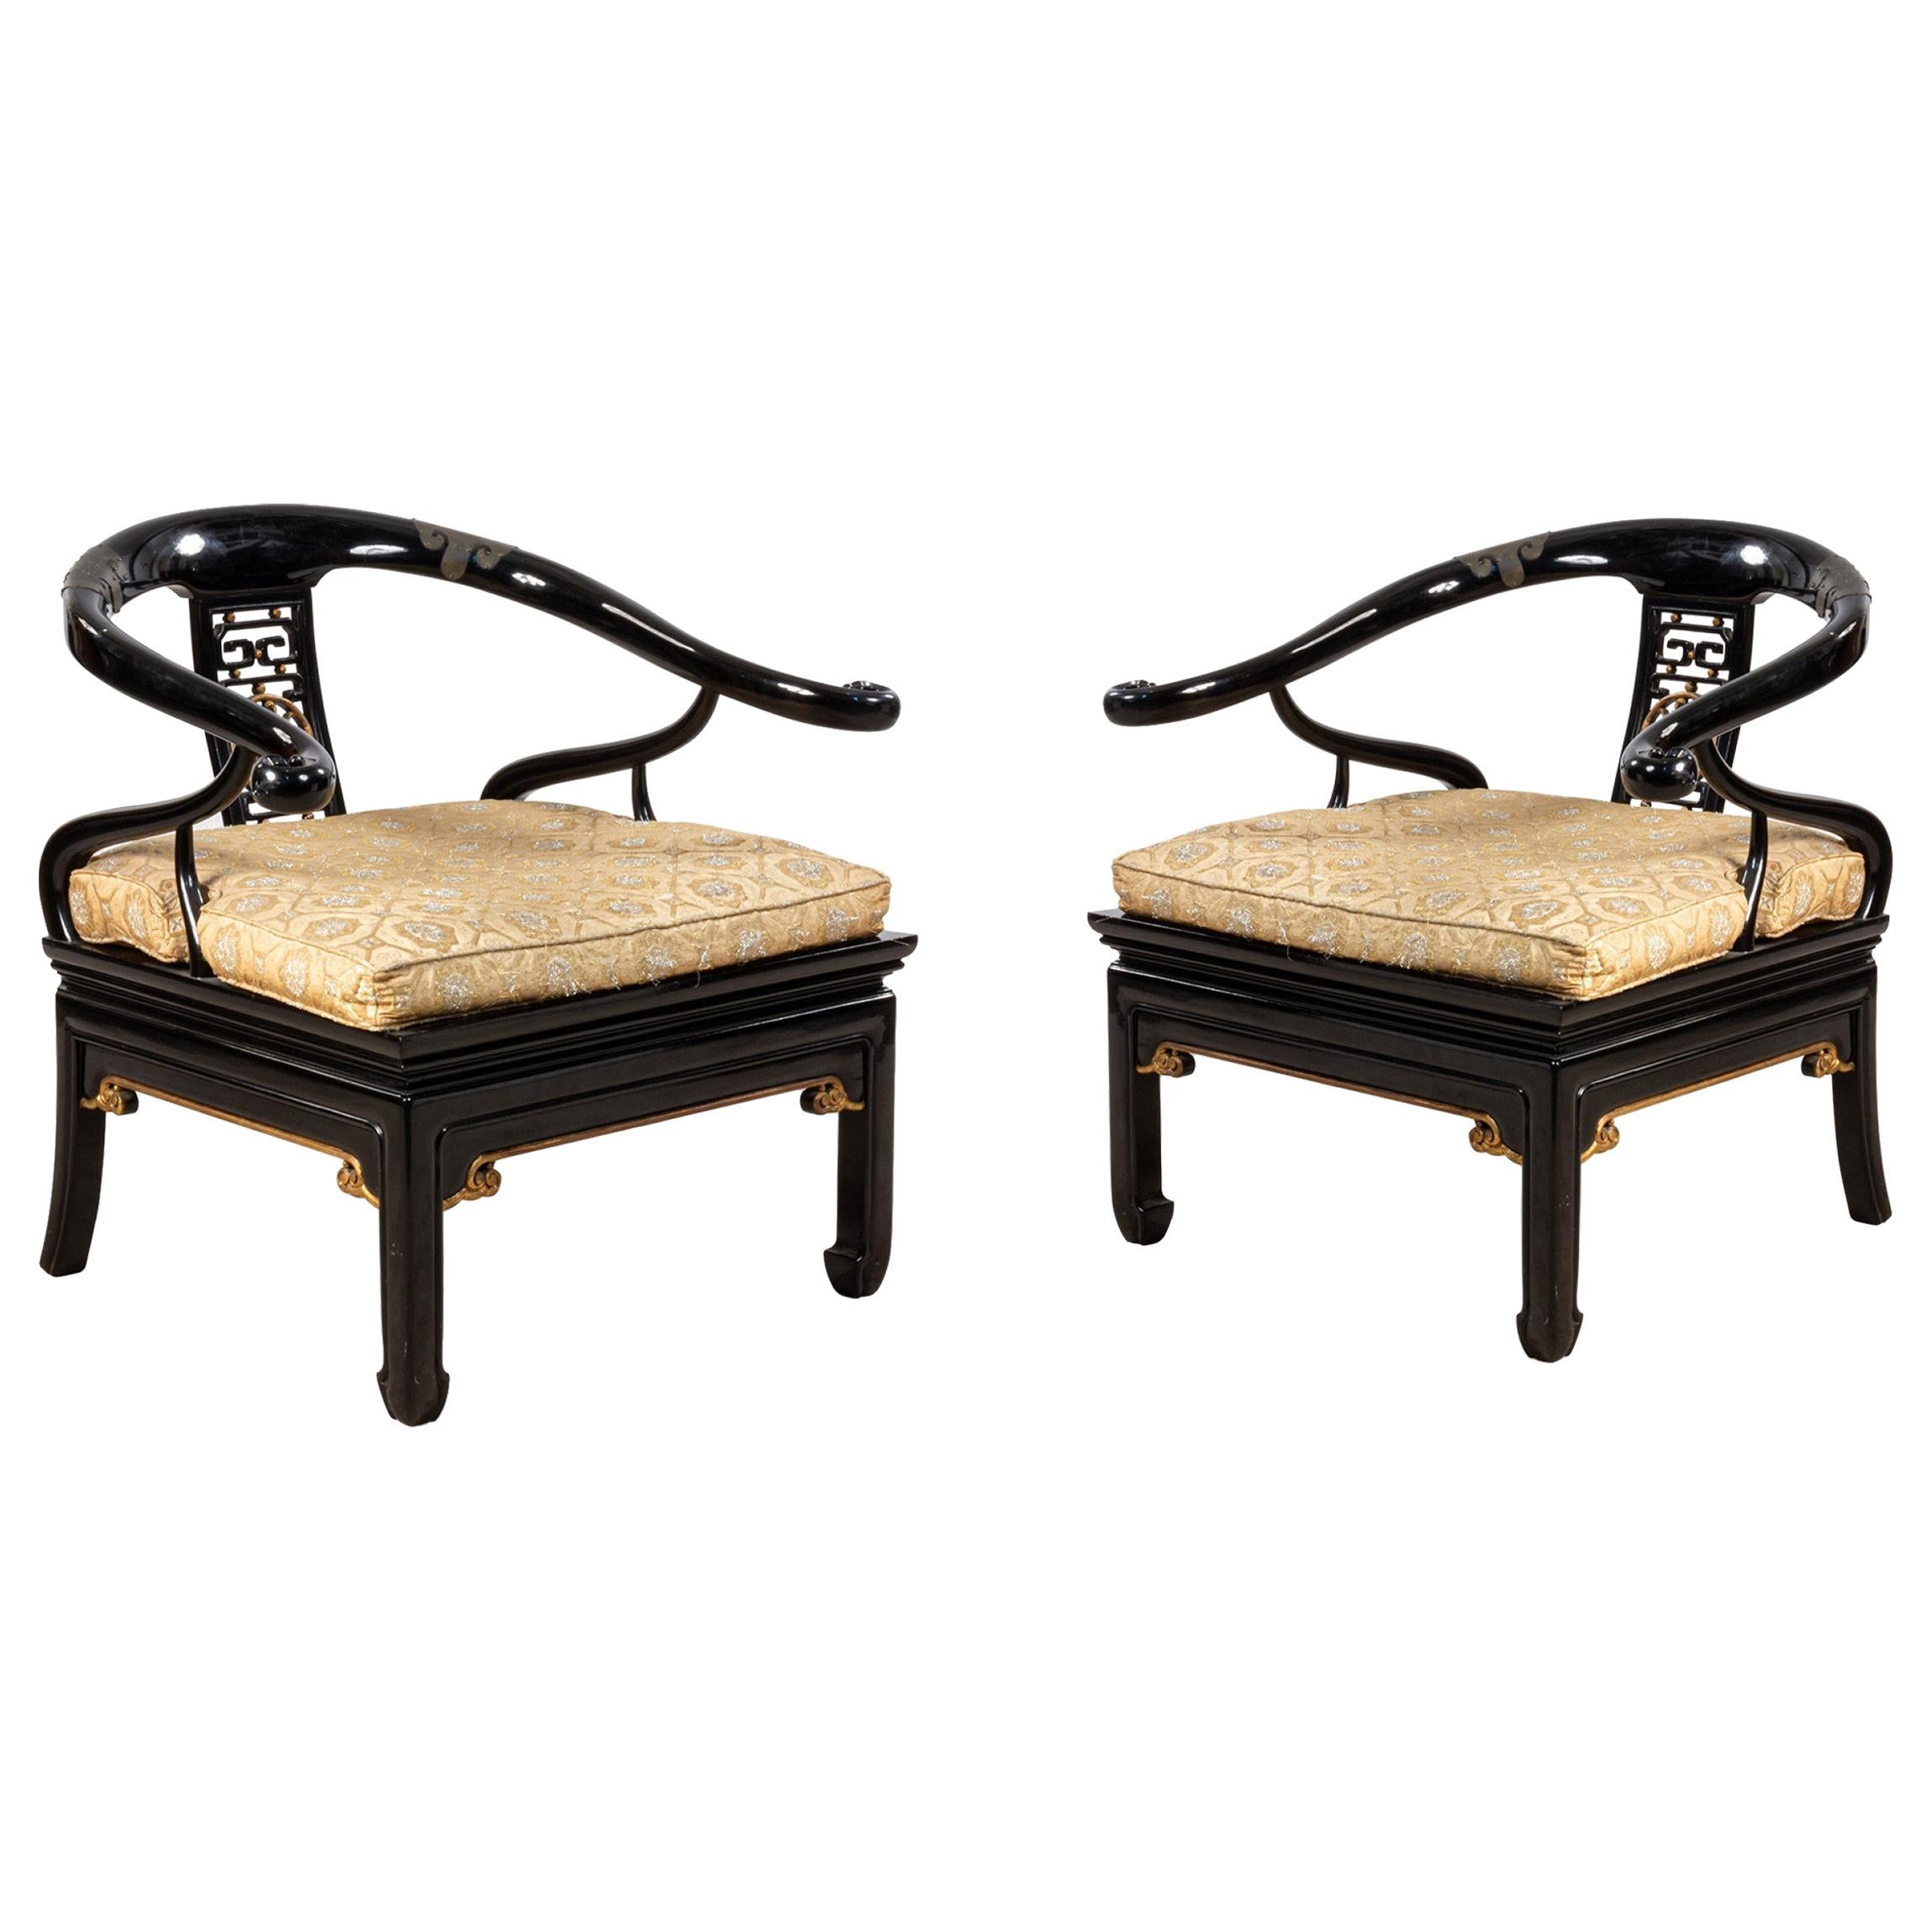 Pair of Chinese Horseshoe Shaped Chairs in the Style of James Mont